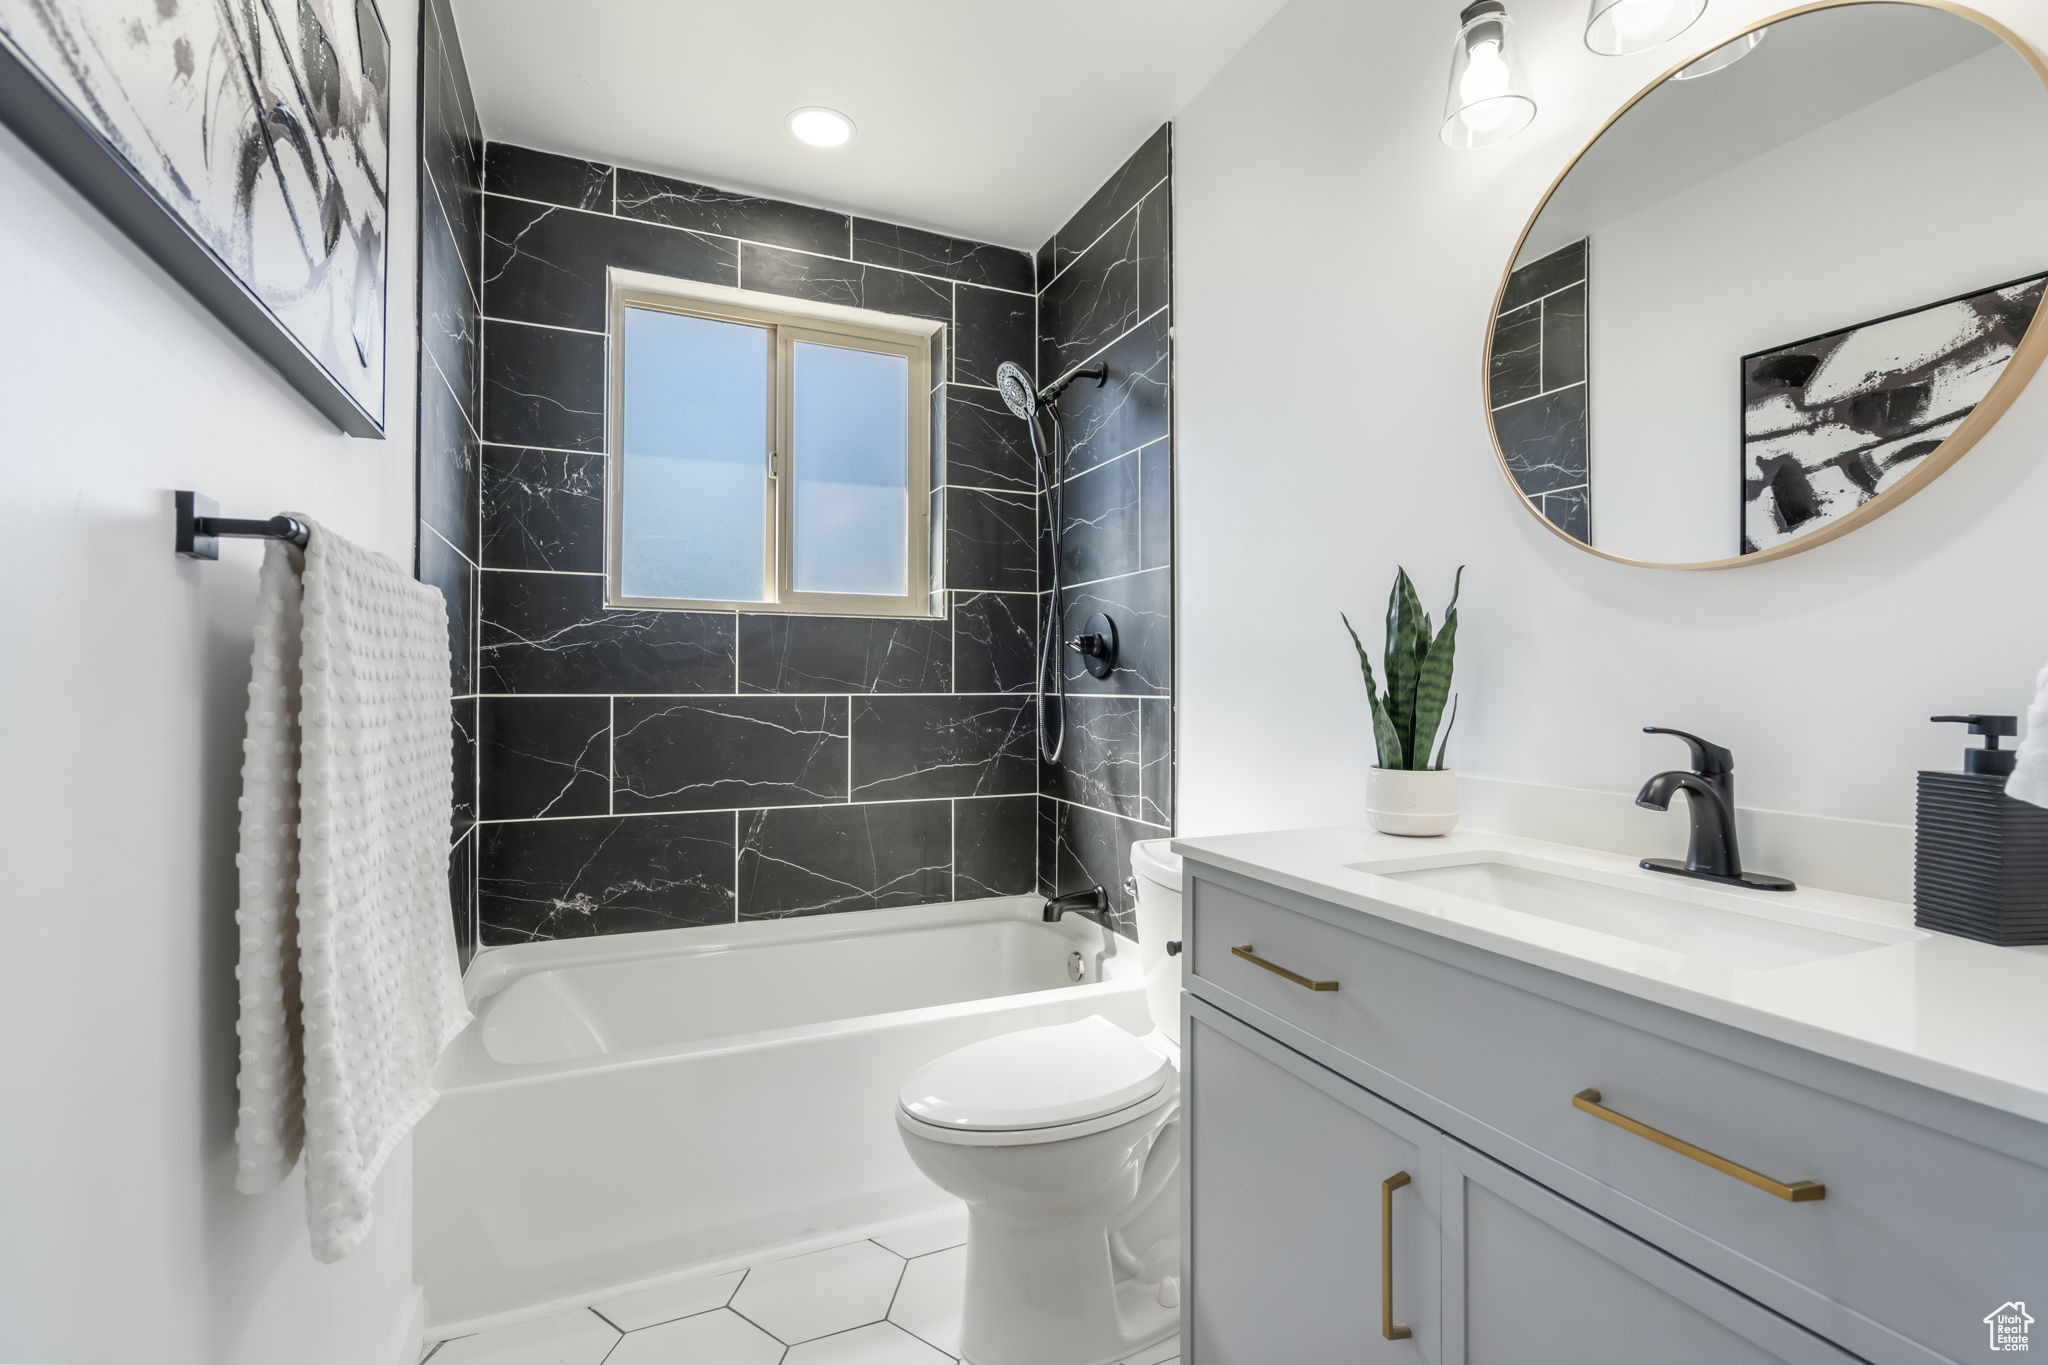 Full bathroom with tiled shower / bath combo, tile flooring, toilet, and large vanity